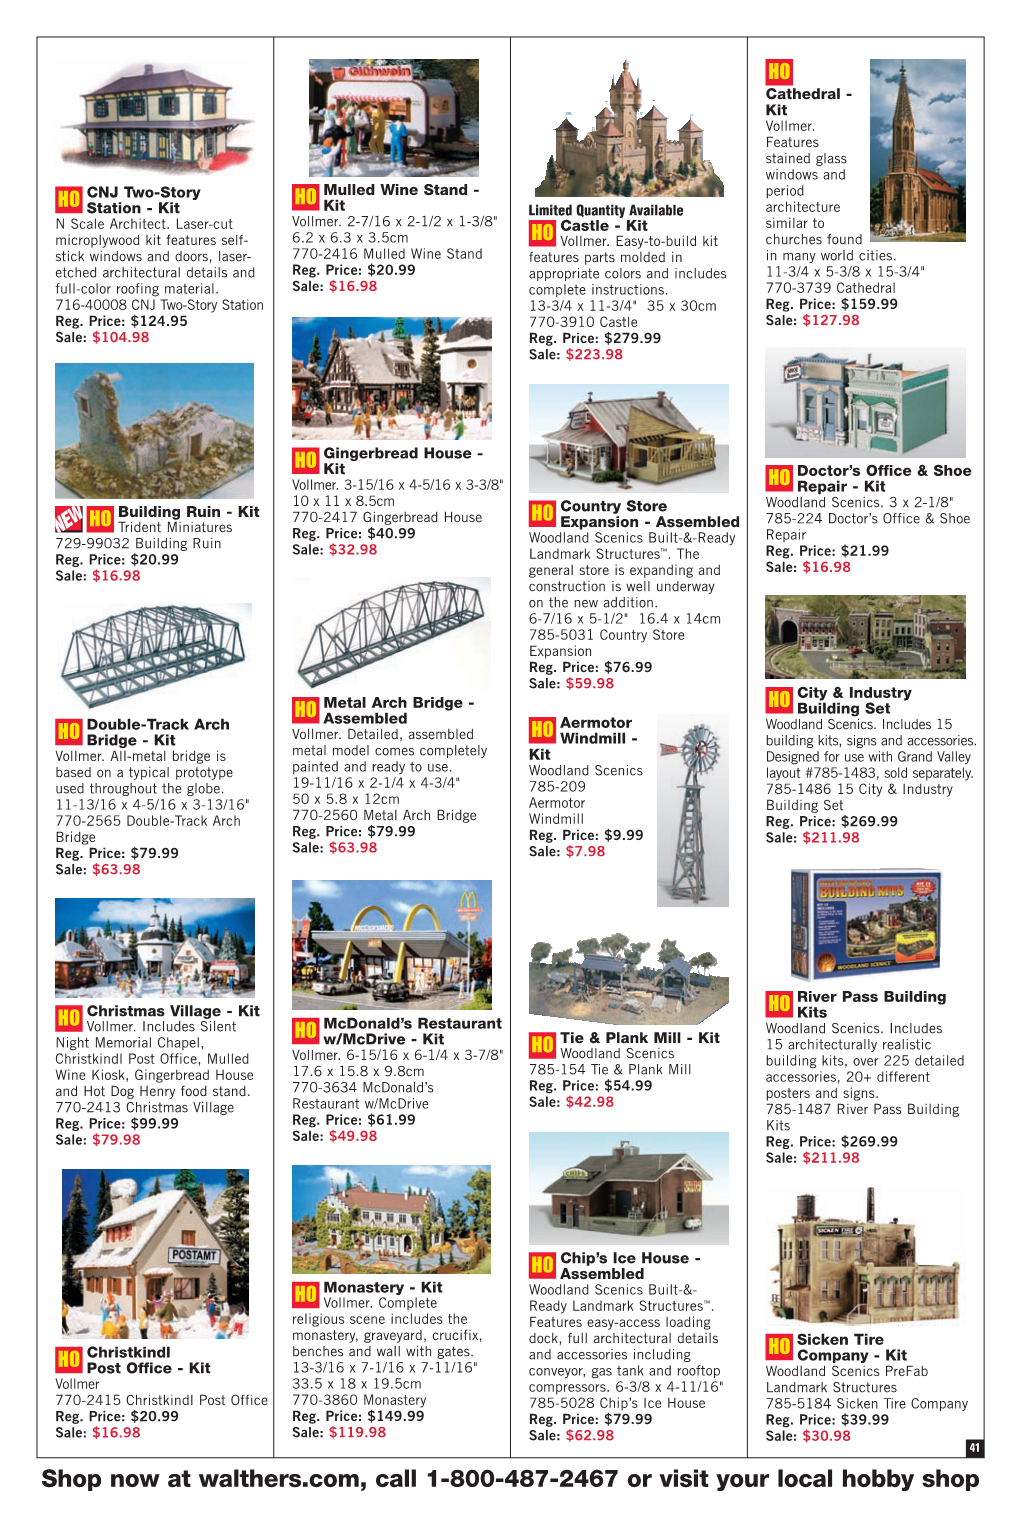 Shop Now at Walthers.Com, Call 1-800-487-2467 Or Visit Your Local Hobby Shop 42-March2012flyer.Ps 2/2/12 5:31 PM Page 42